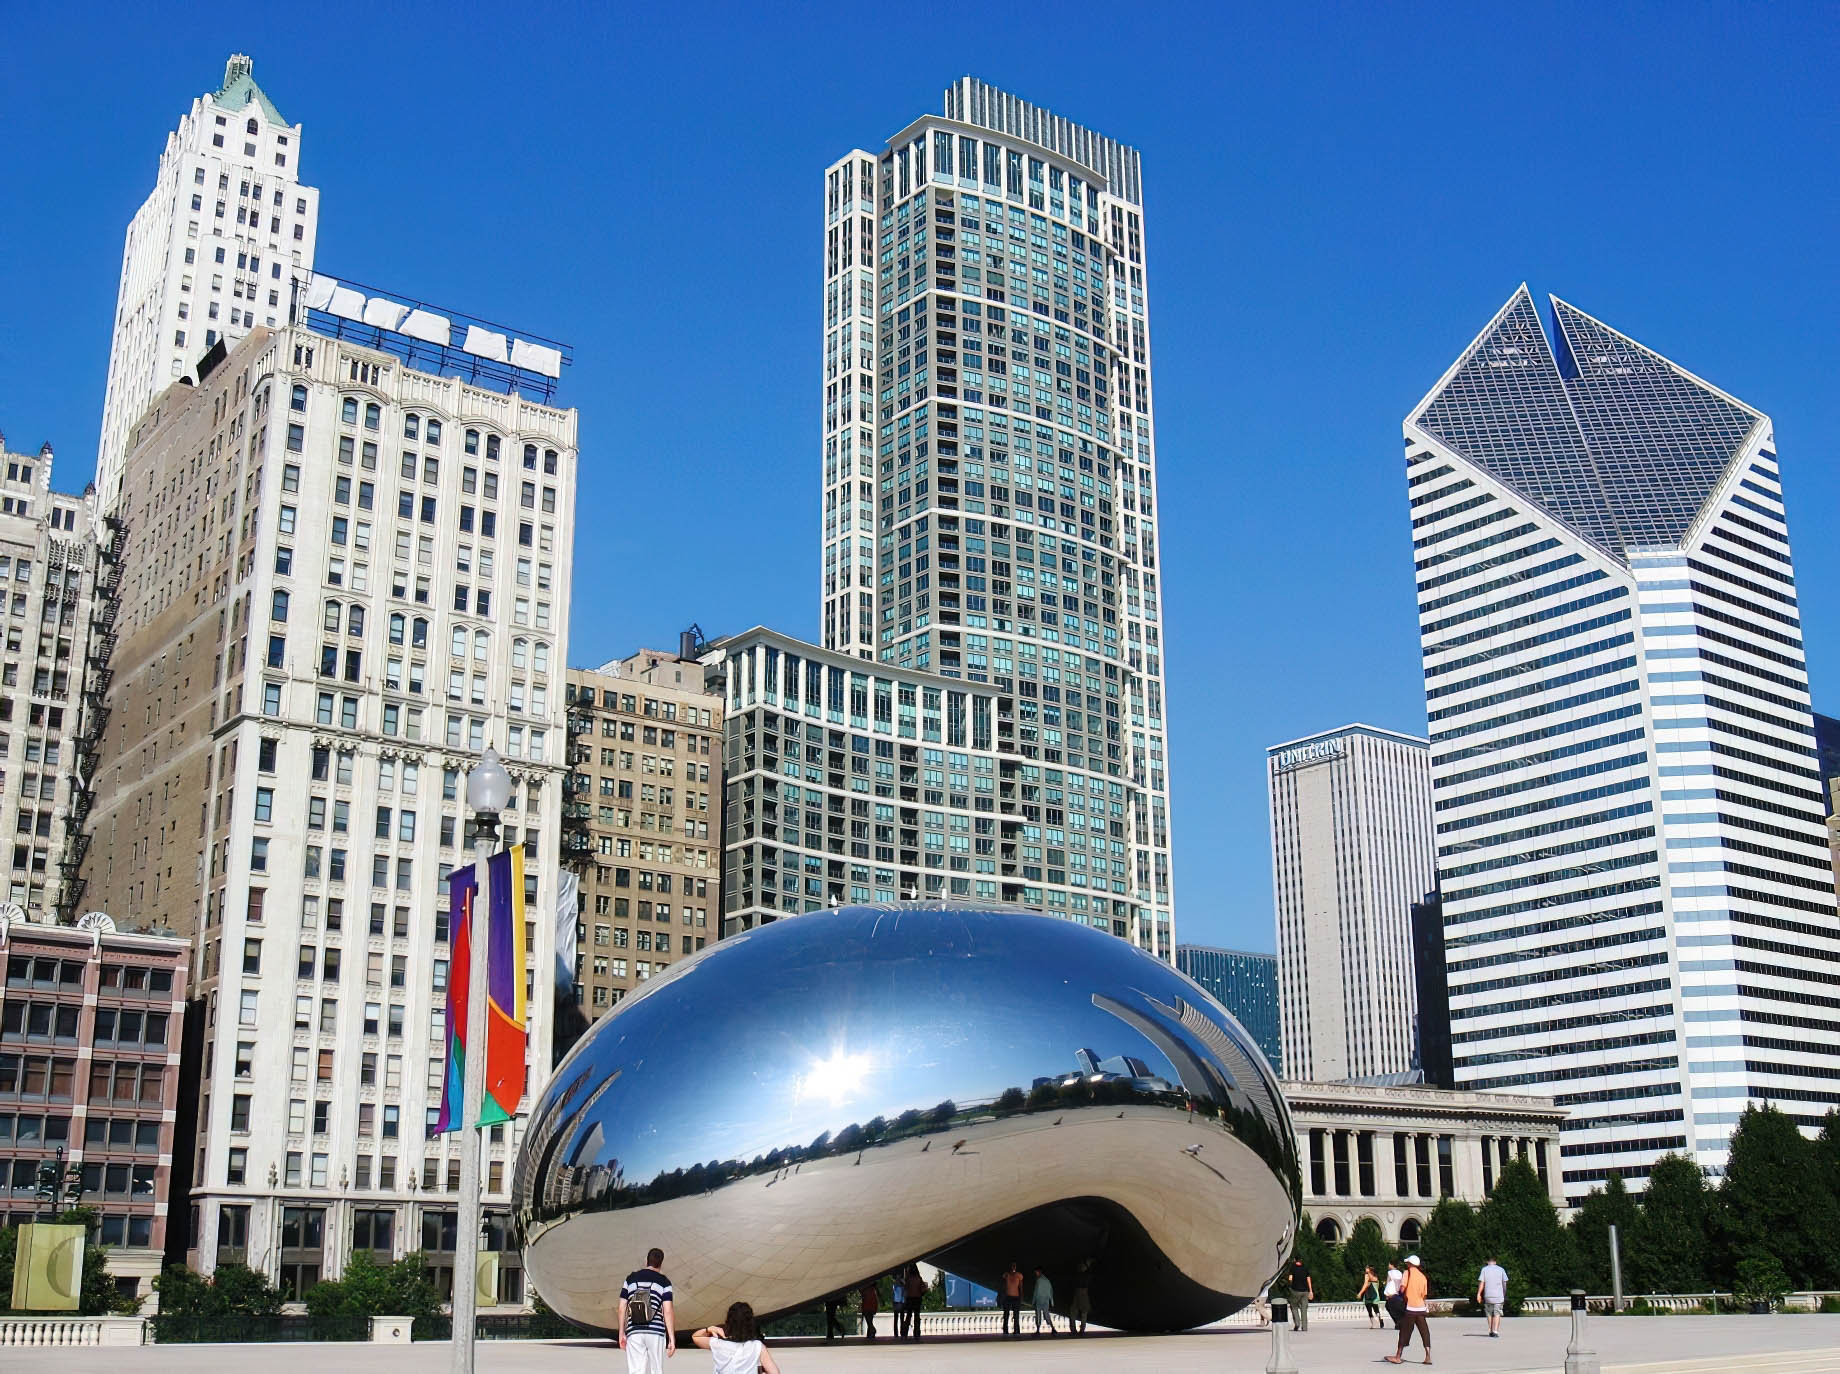 Viceroy Chicago Hotel – Chicago, IL, USA – Cloud Gate Public Structure